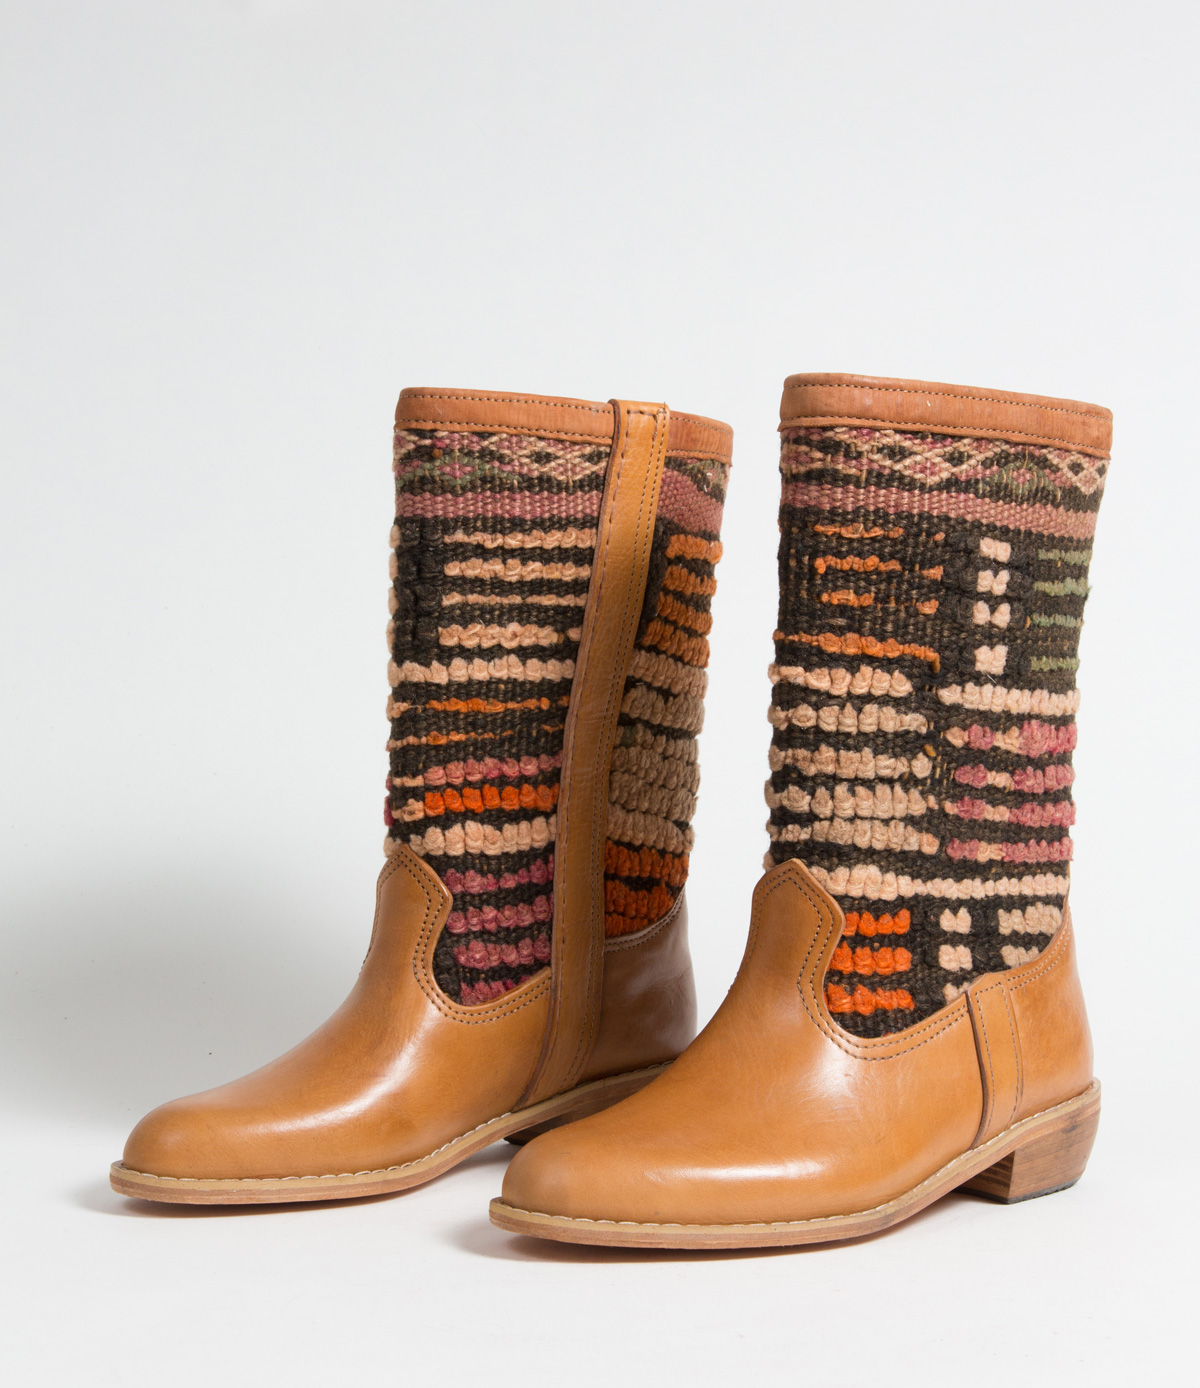 Bottes Kilim cuir mababouche artisanales (Réf. GL3-39)